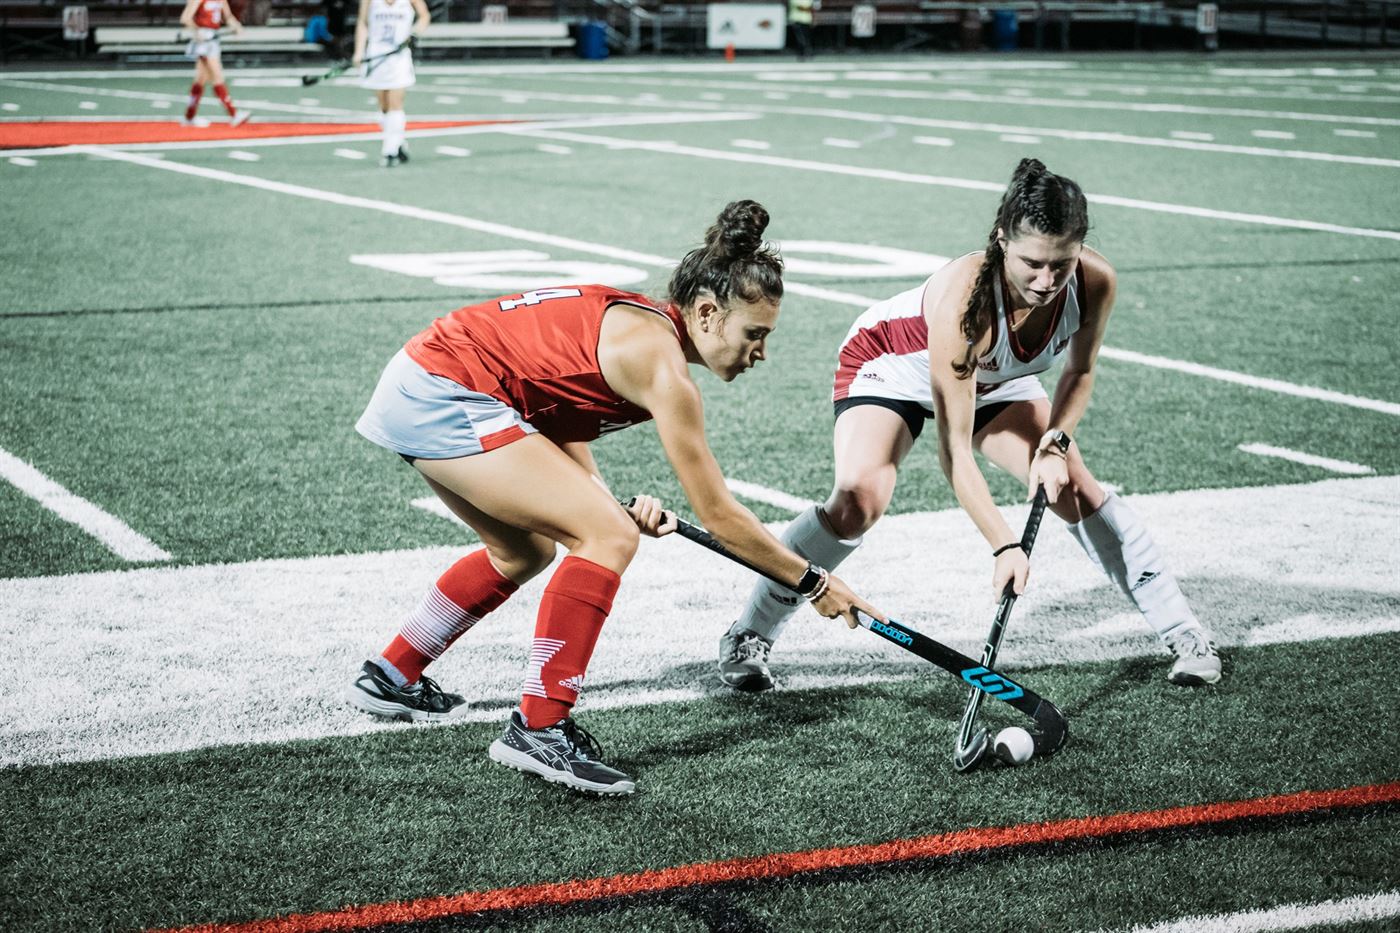 Stevens would not let up on defense, and scored in the second half of the game, but would ultimately go down to Carlie Van Tassel's penalty stroke. Dan Dreisbach | The Montclarion